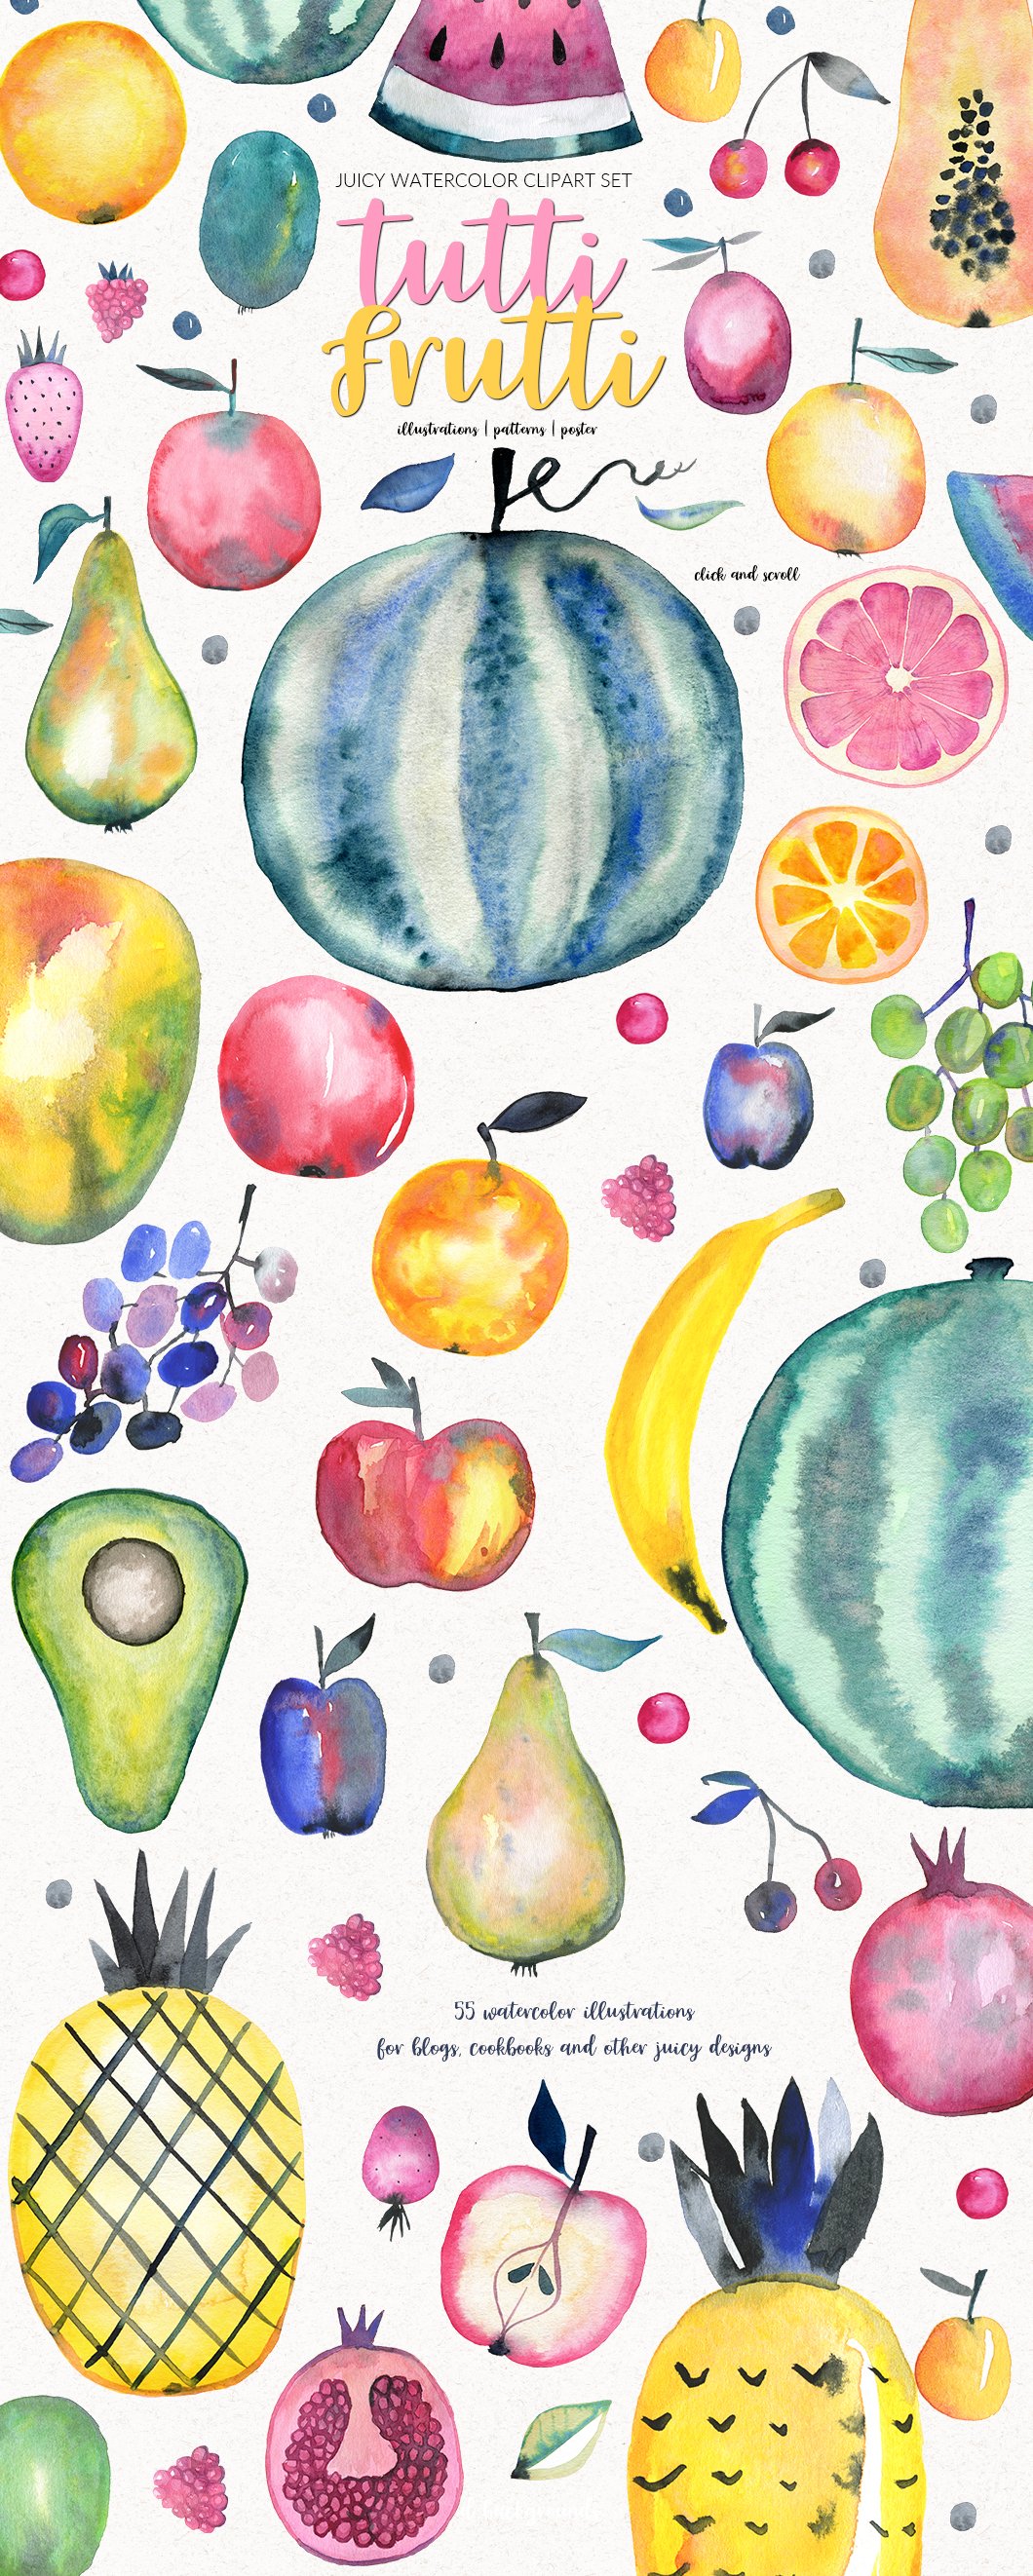 Pink-yellow lettering "Tutti Frutti" and 55 different watercolor illustrations of tutti frutti on a white background.